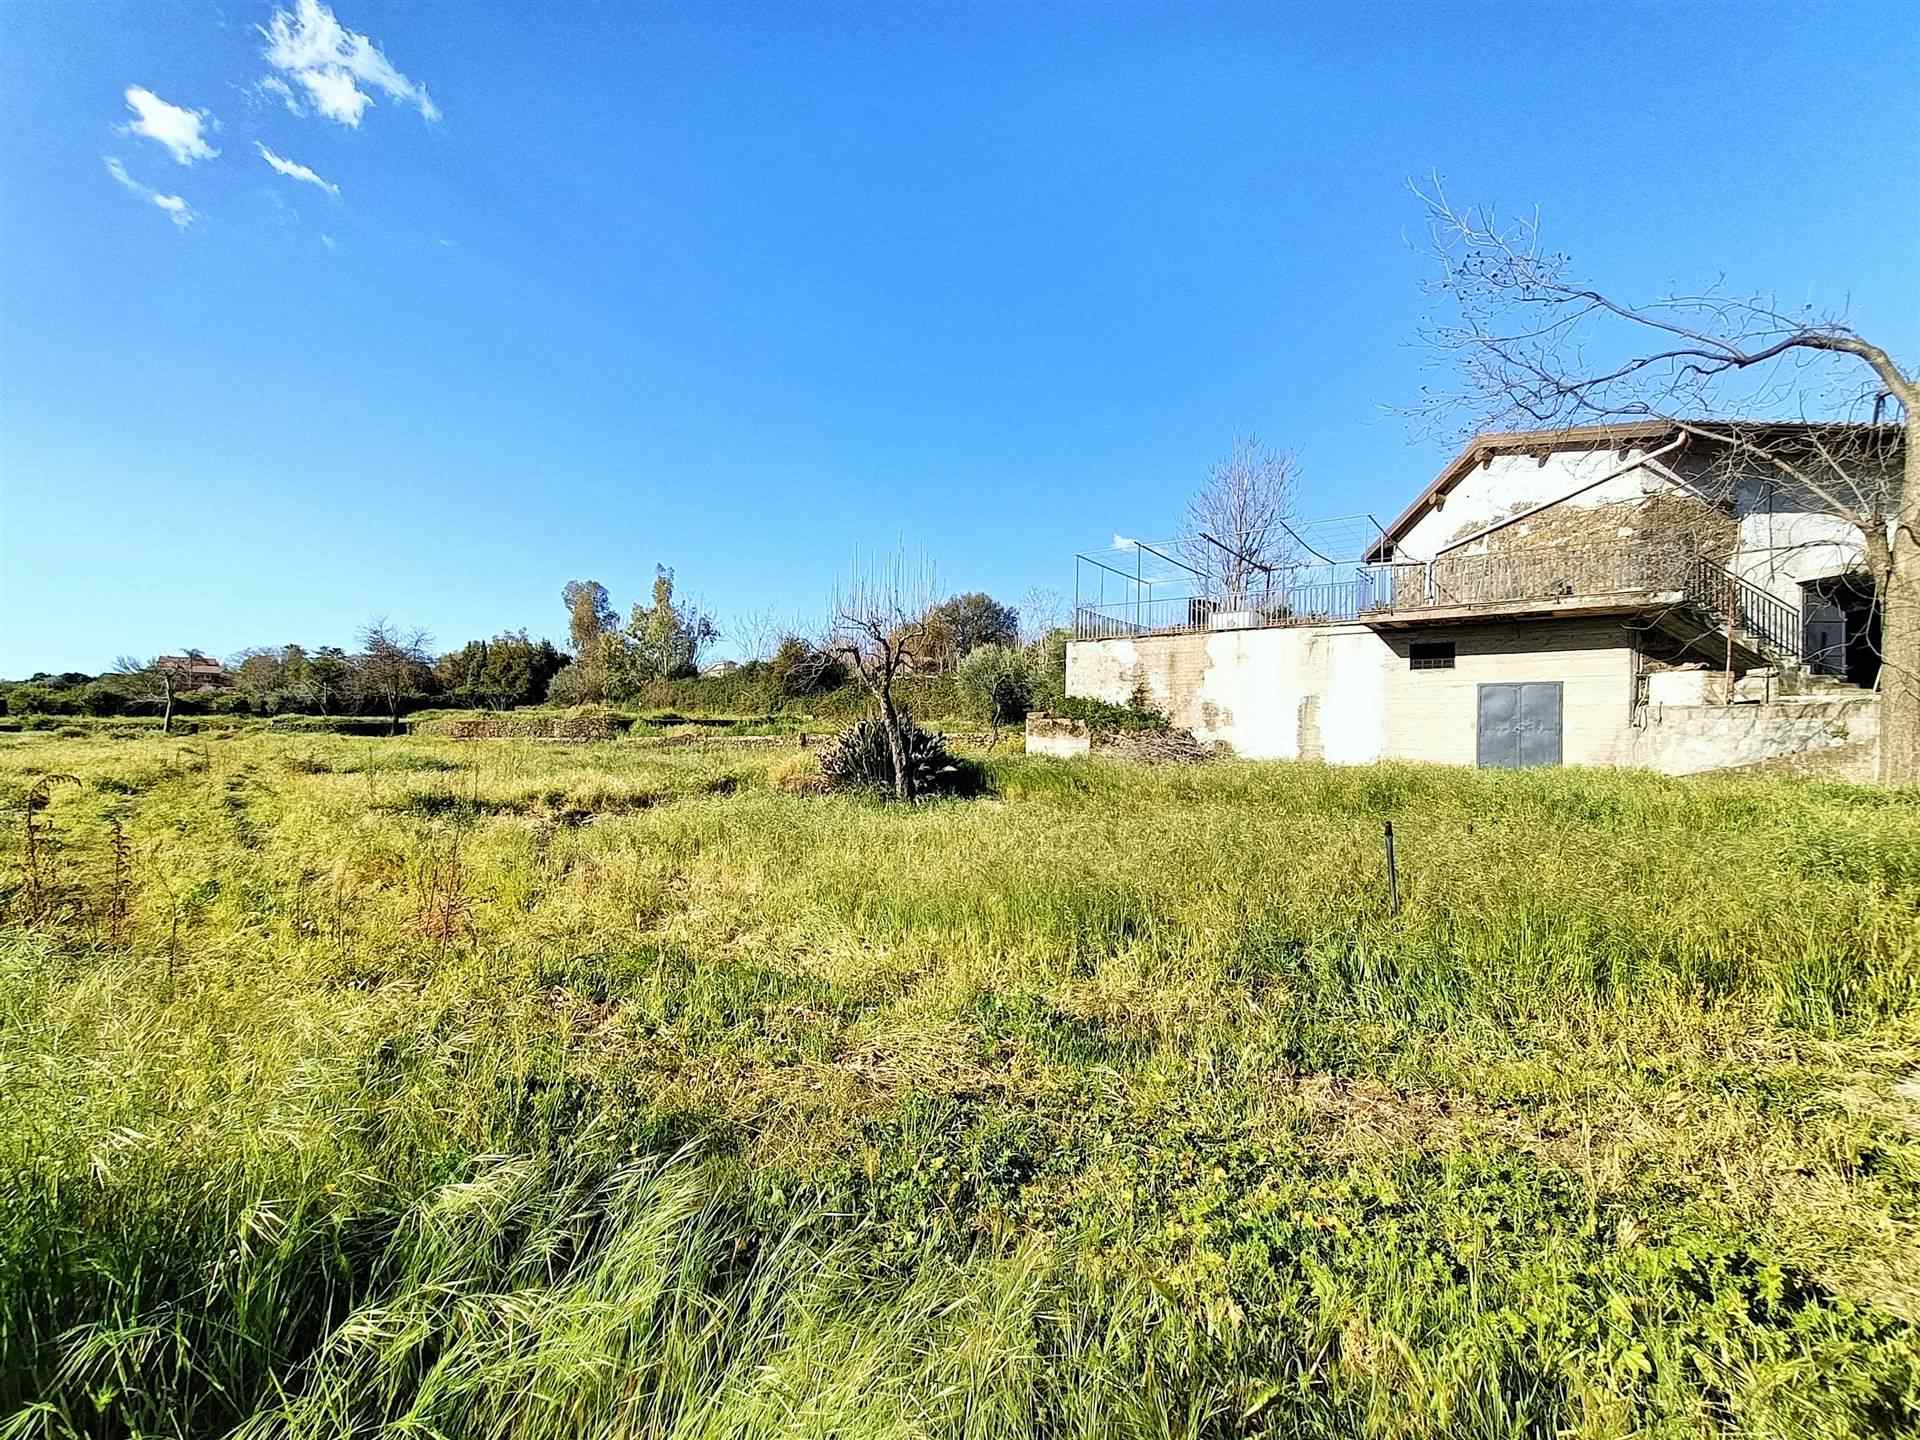 VALVERDE, Agricultural land for sale of 10000 Sq. mt., Energetic class: G, placed at Ground, composed by: , Garden, Price: € 268,000